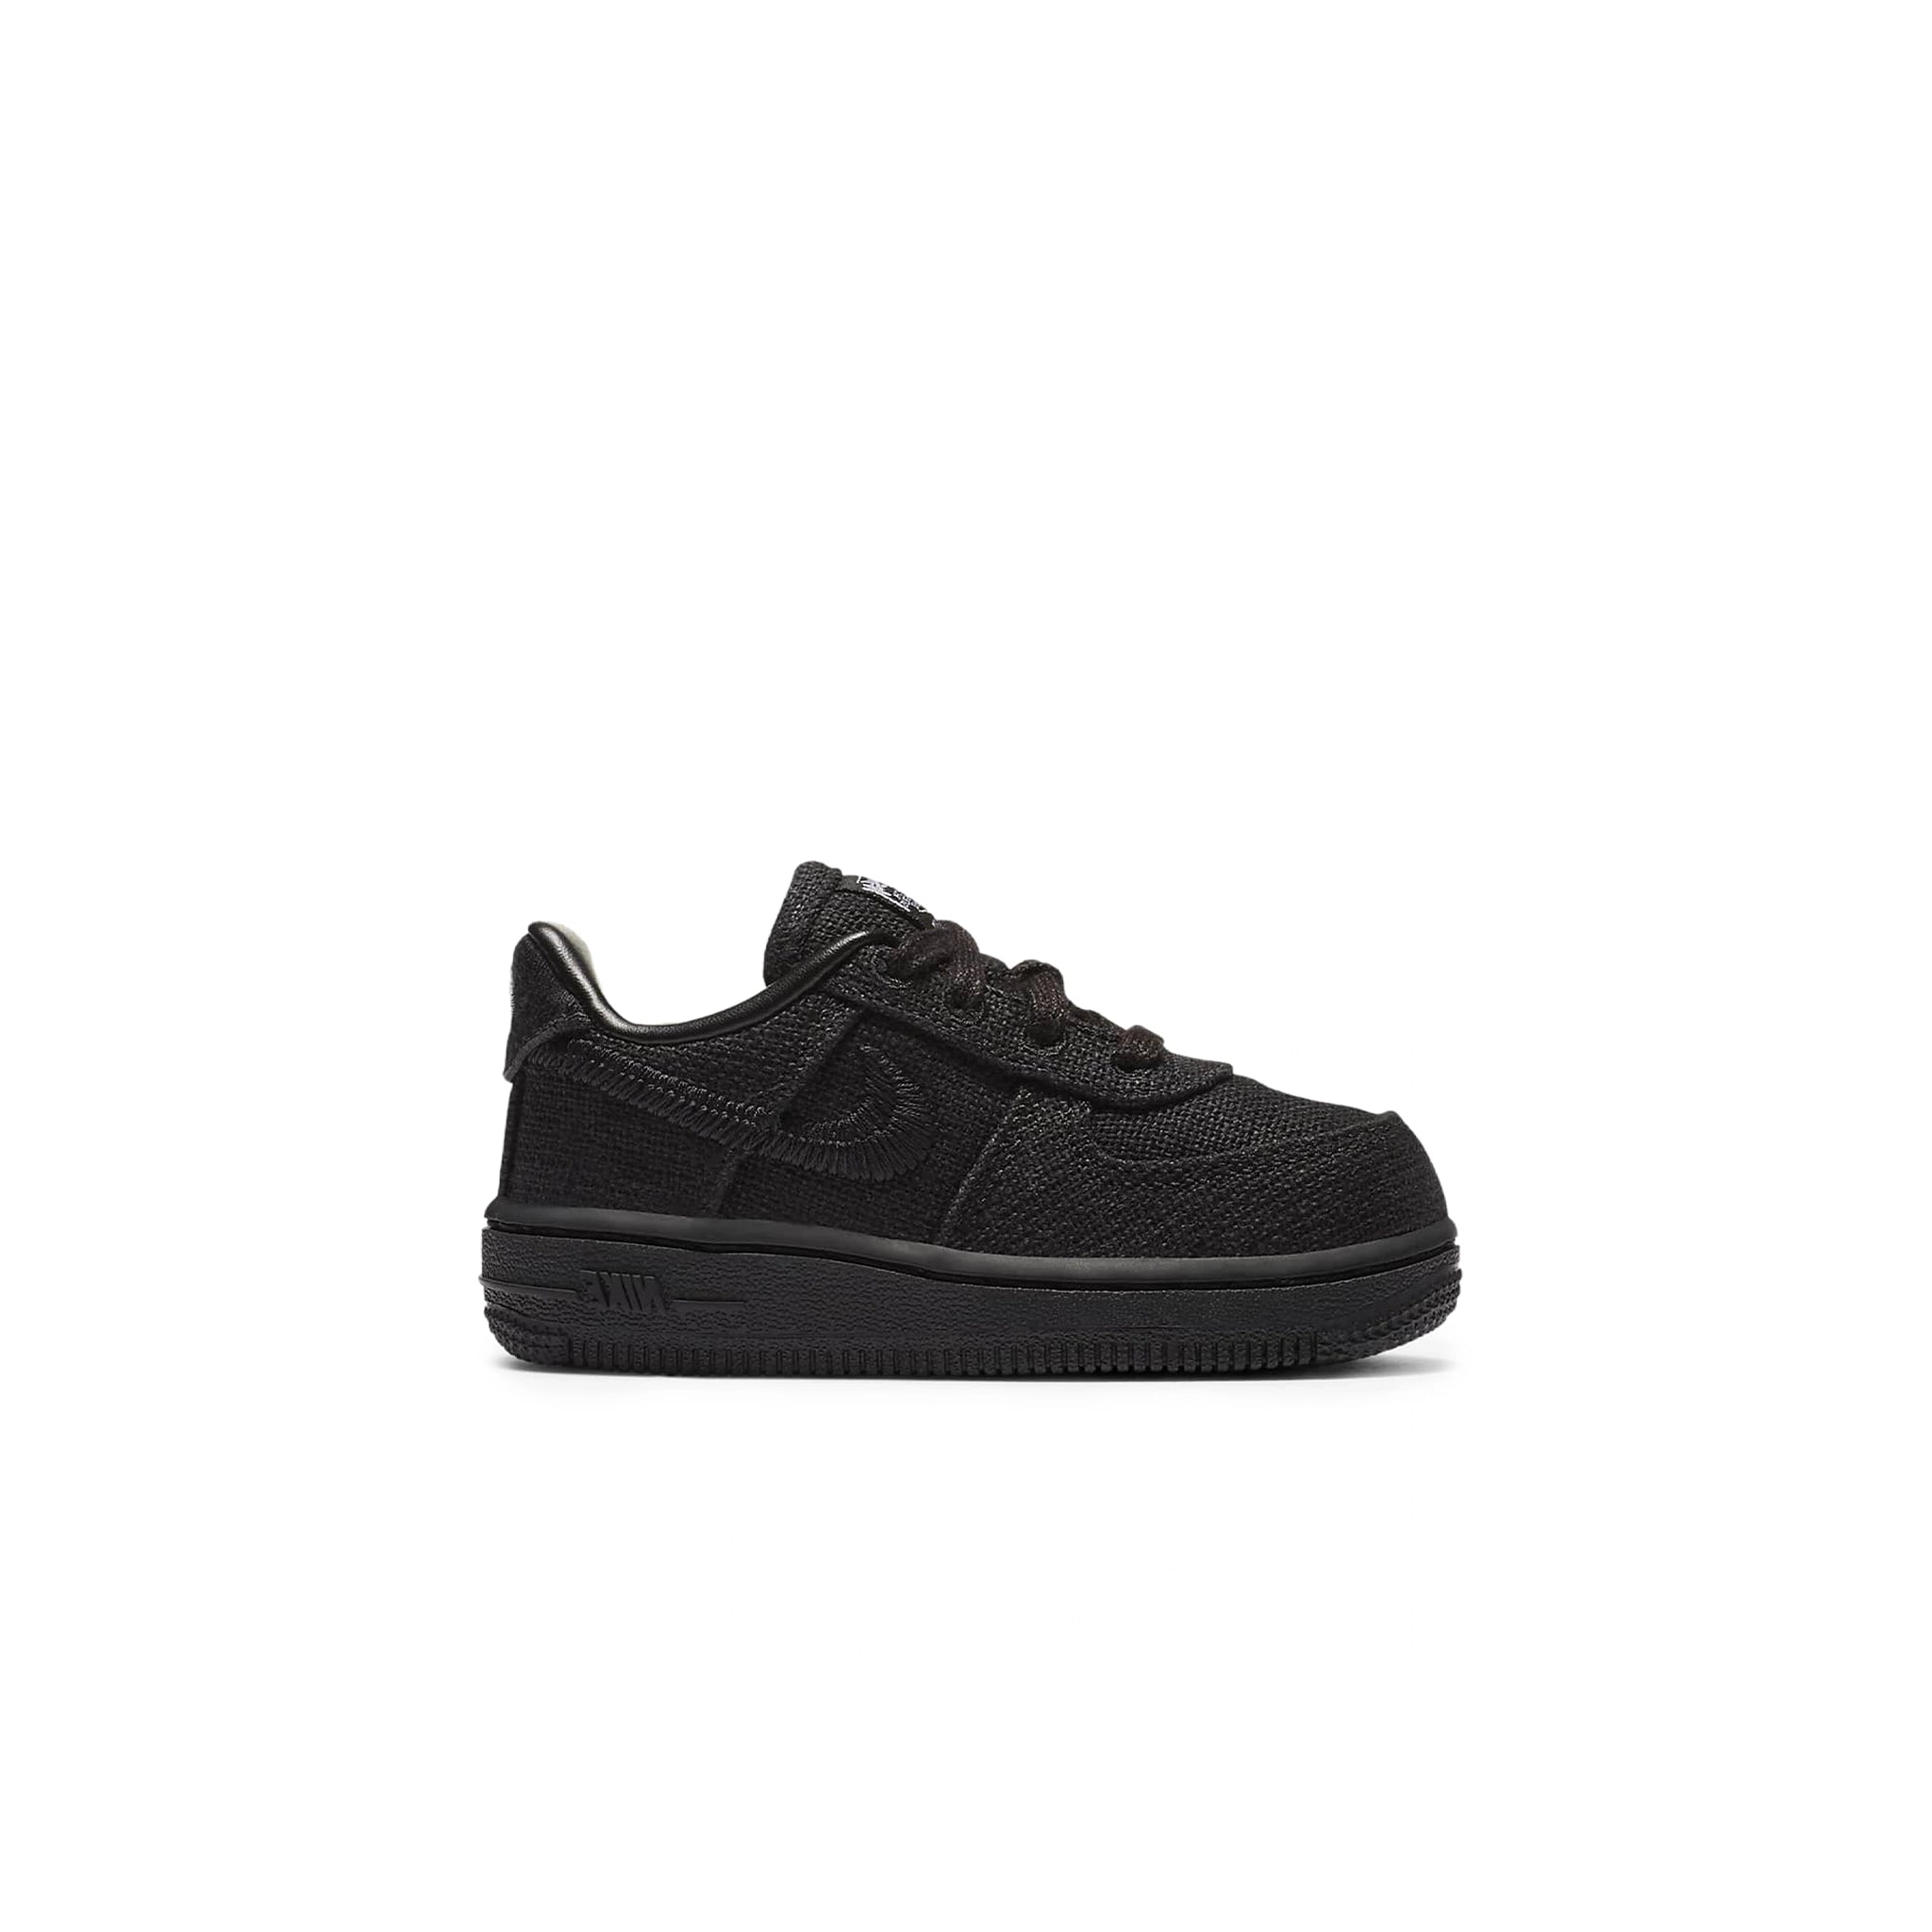 Side view of Stussy x Nike Air Force 1 Low Black (TD) DC8306-001